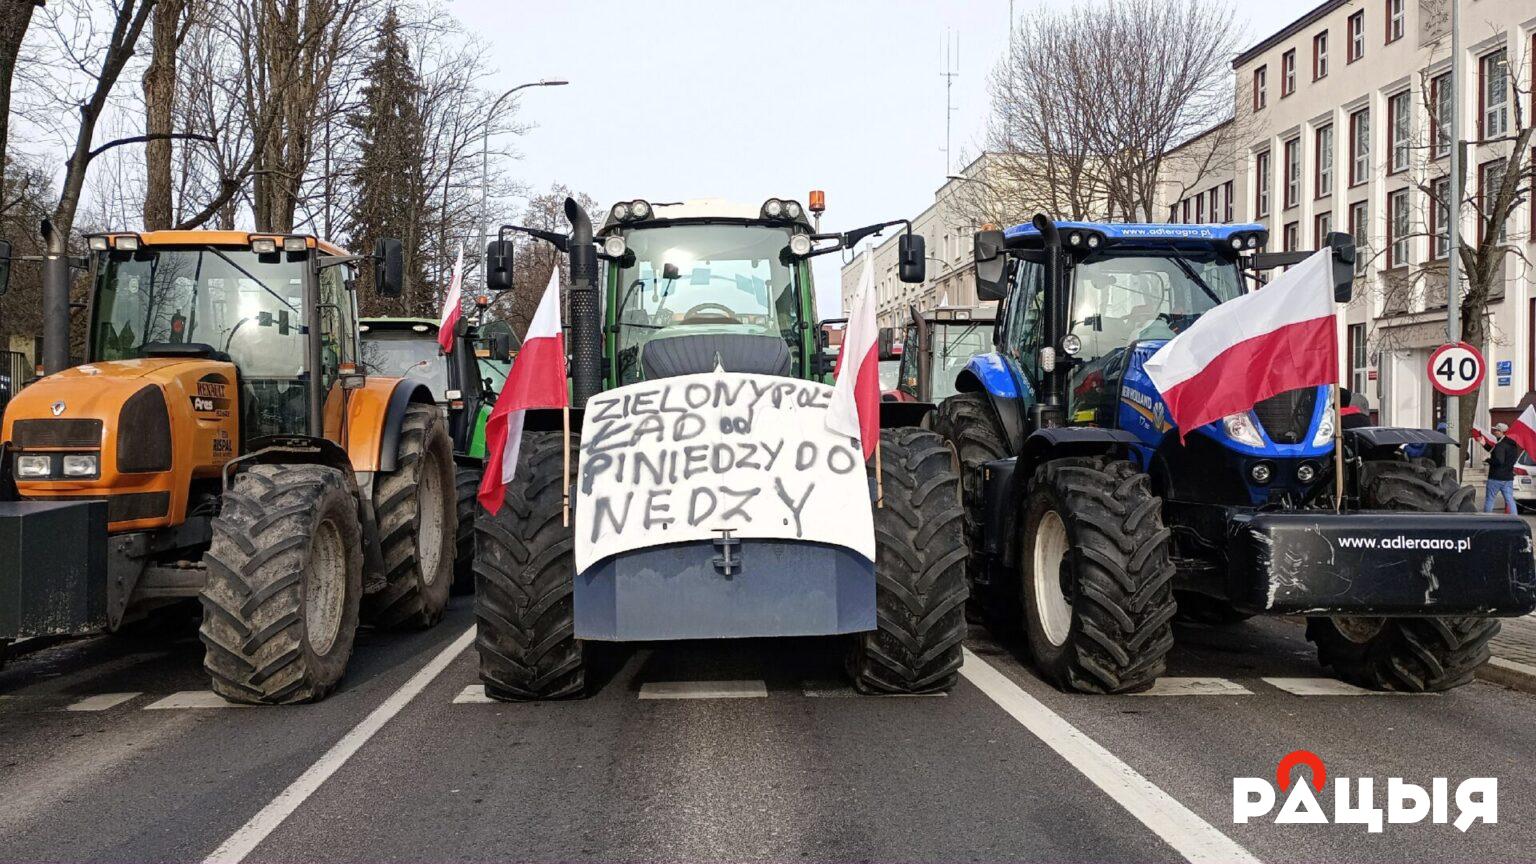 Farmers’ demonstration took place in Bialystok